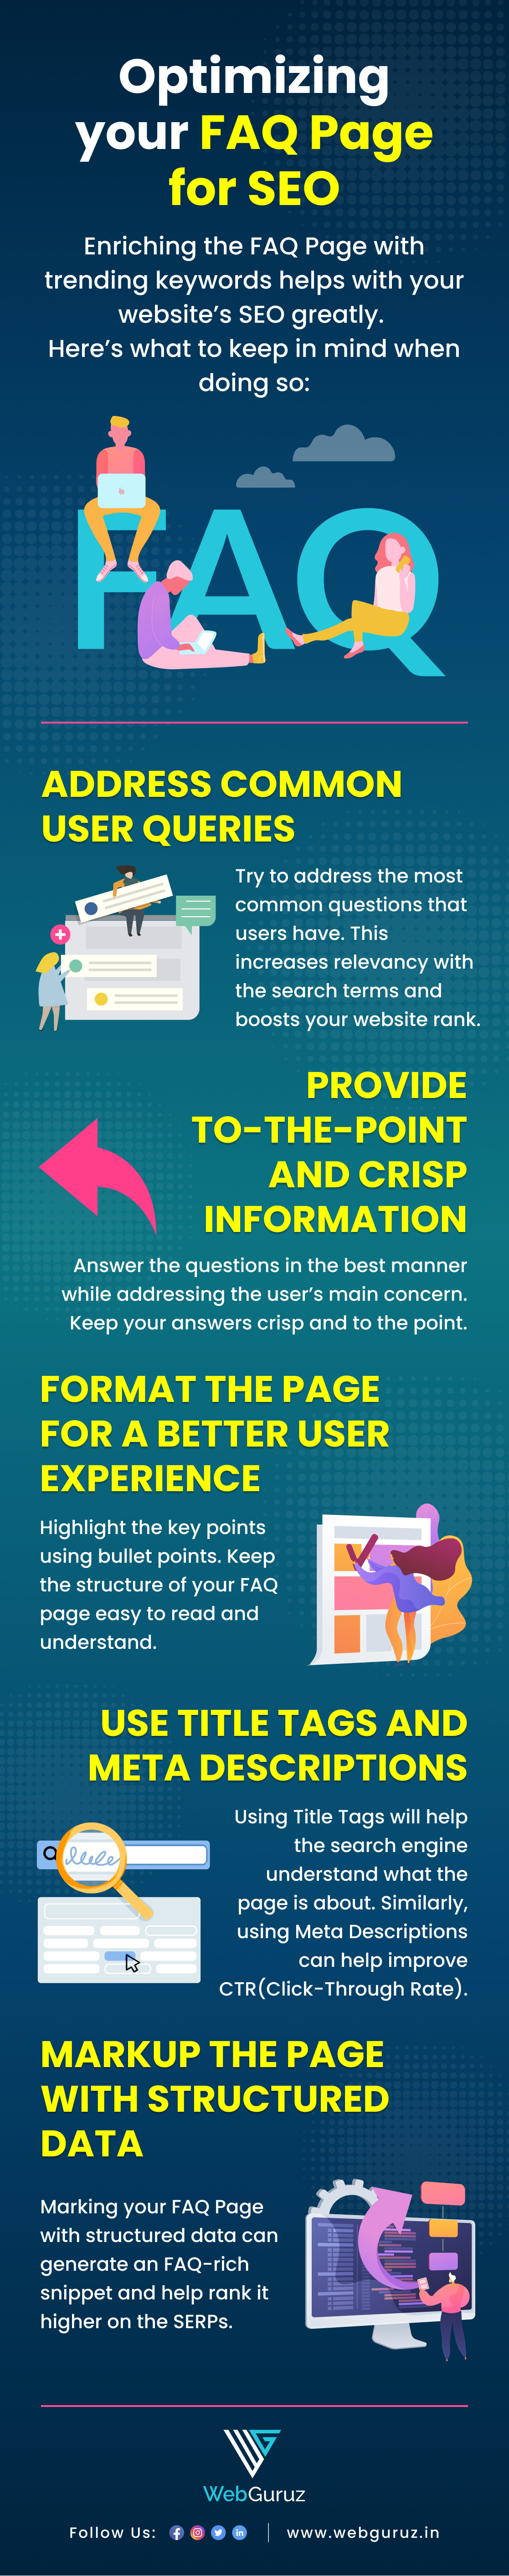 FAQ Pages: Why they’re Essential and How to Optimize Them for SEO?